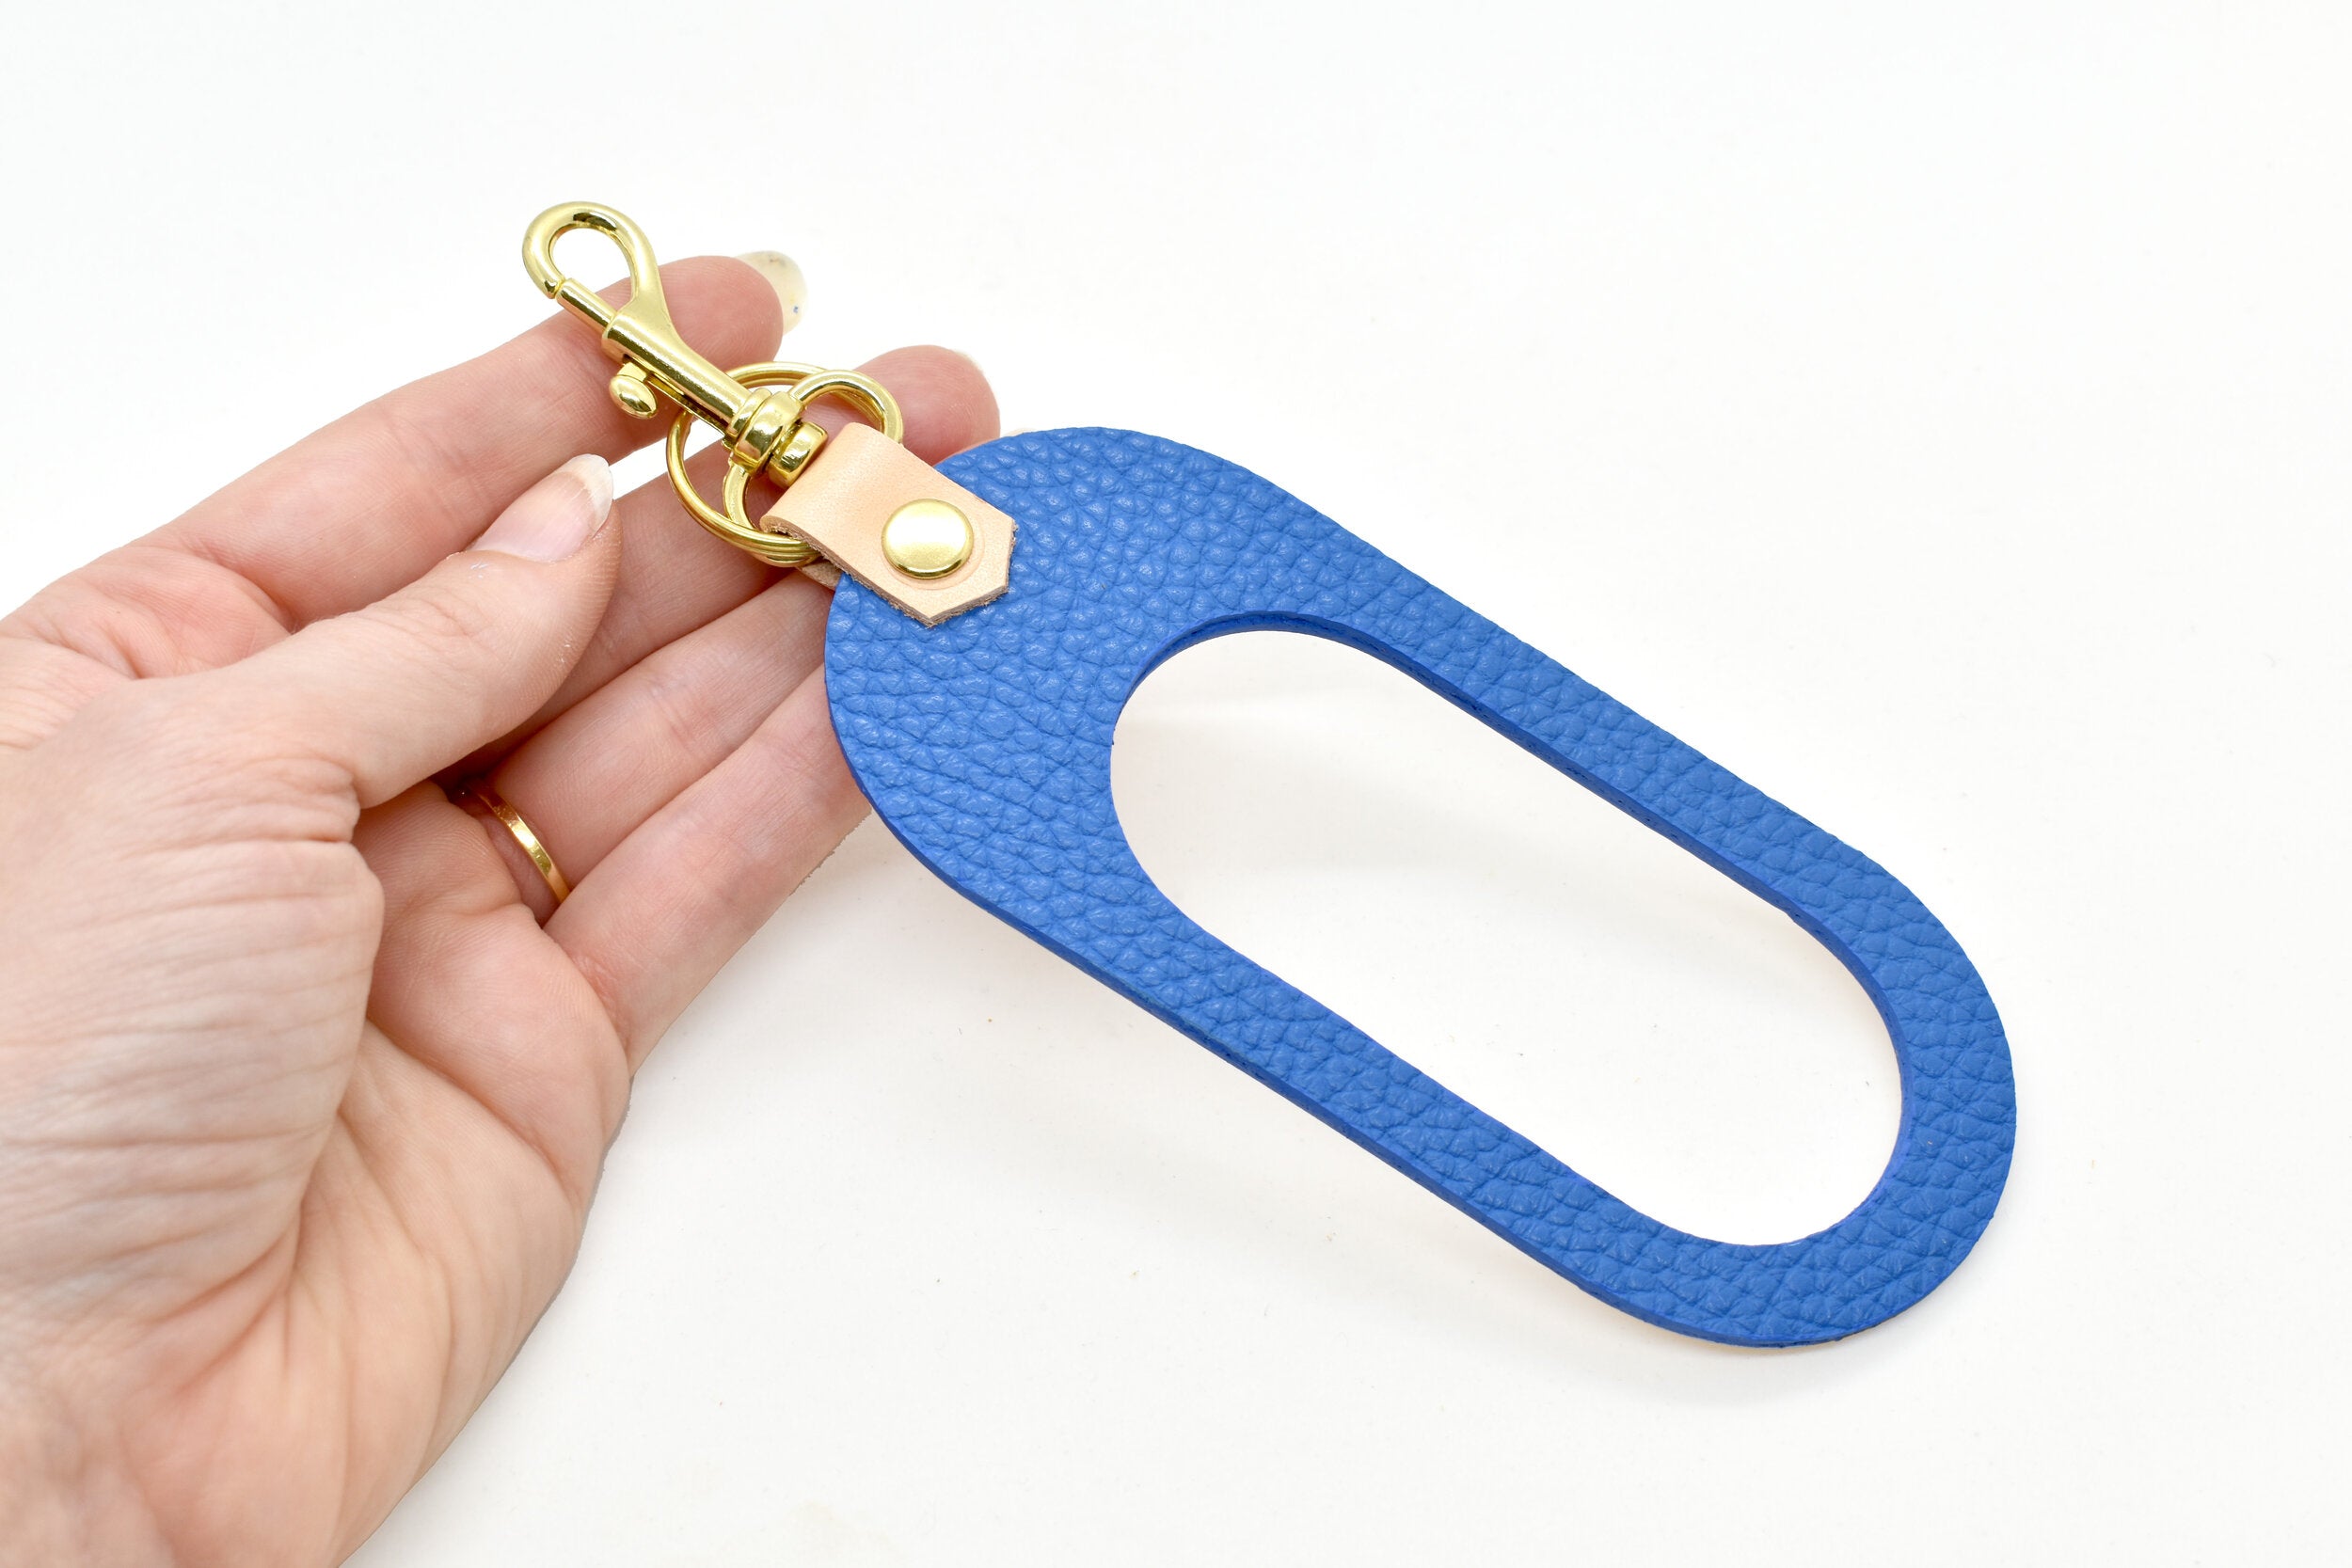 dual colored leather cut out key chain hand strap with gold keyring and spring clasp in bright blue and beige natural authentic leather.